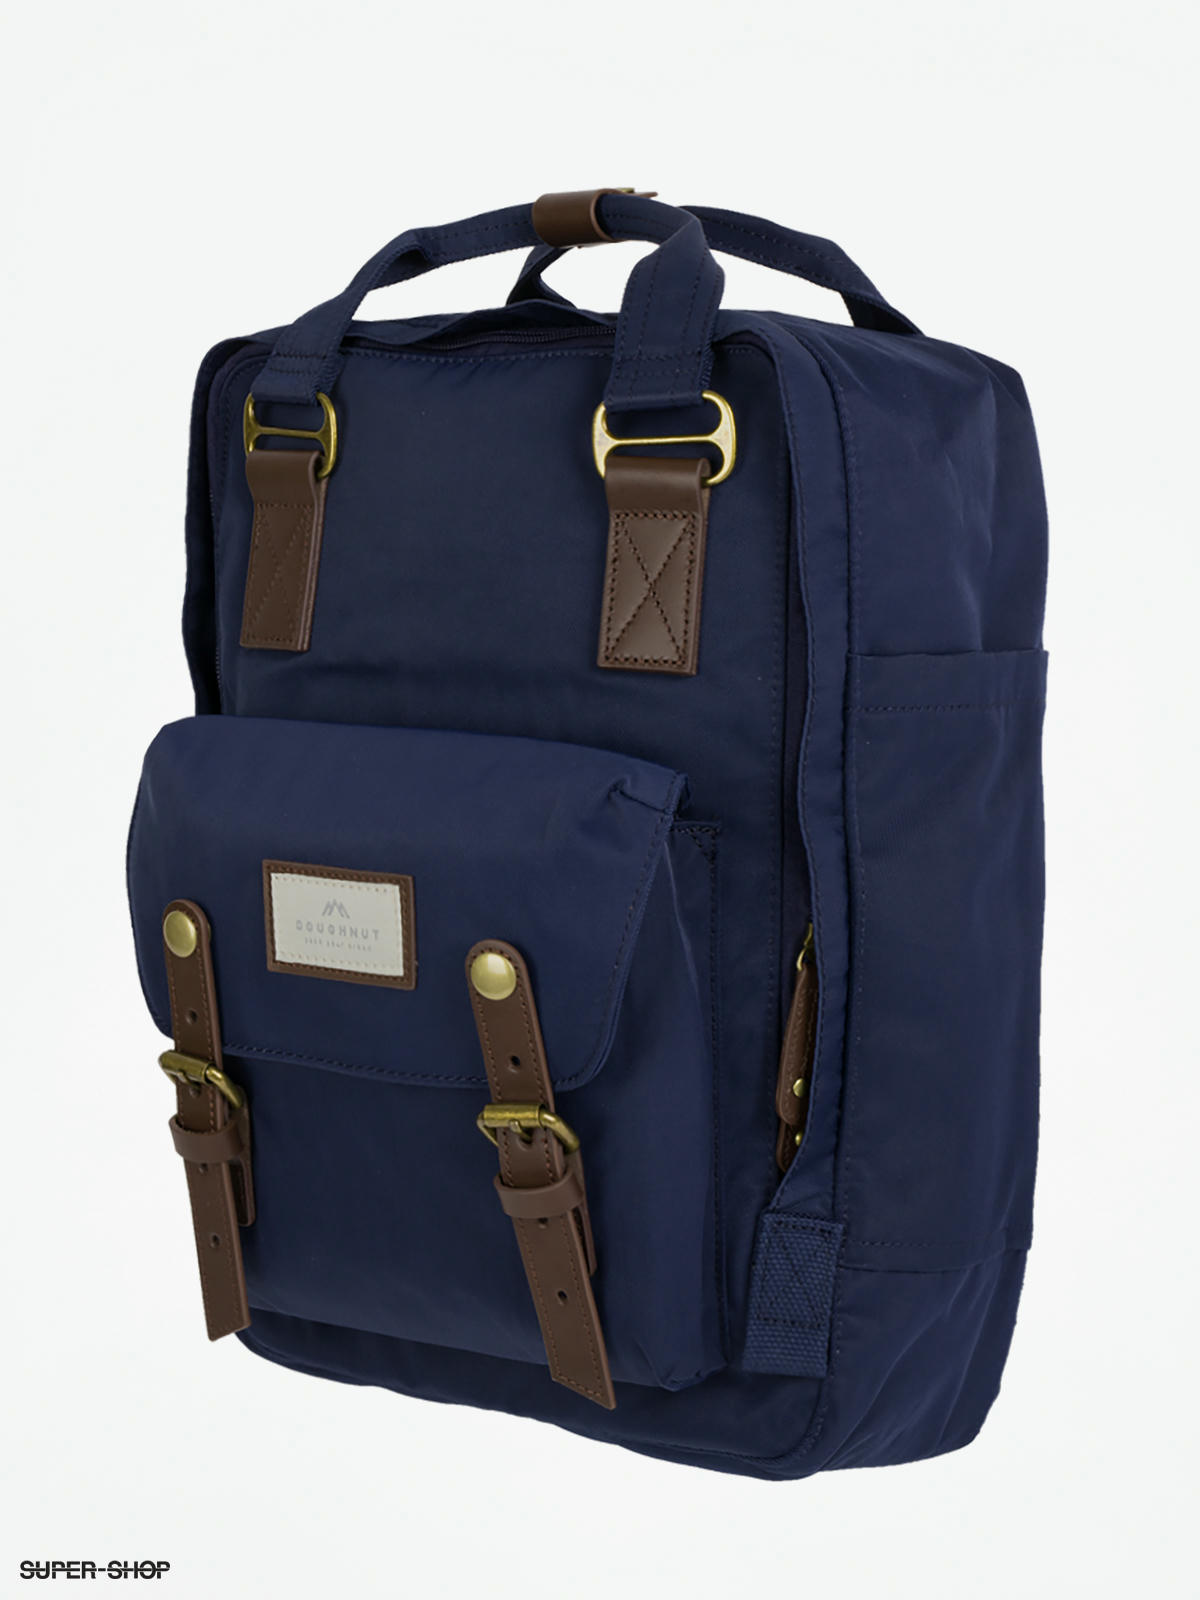 blueberry backpack